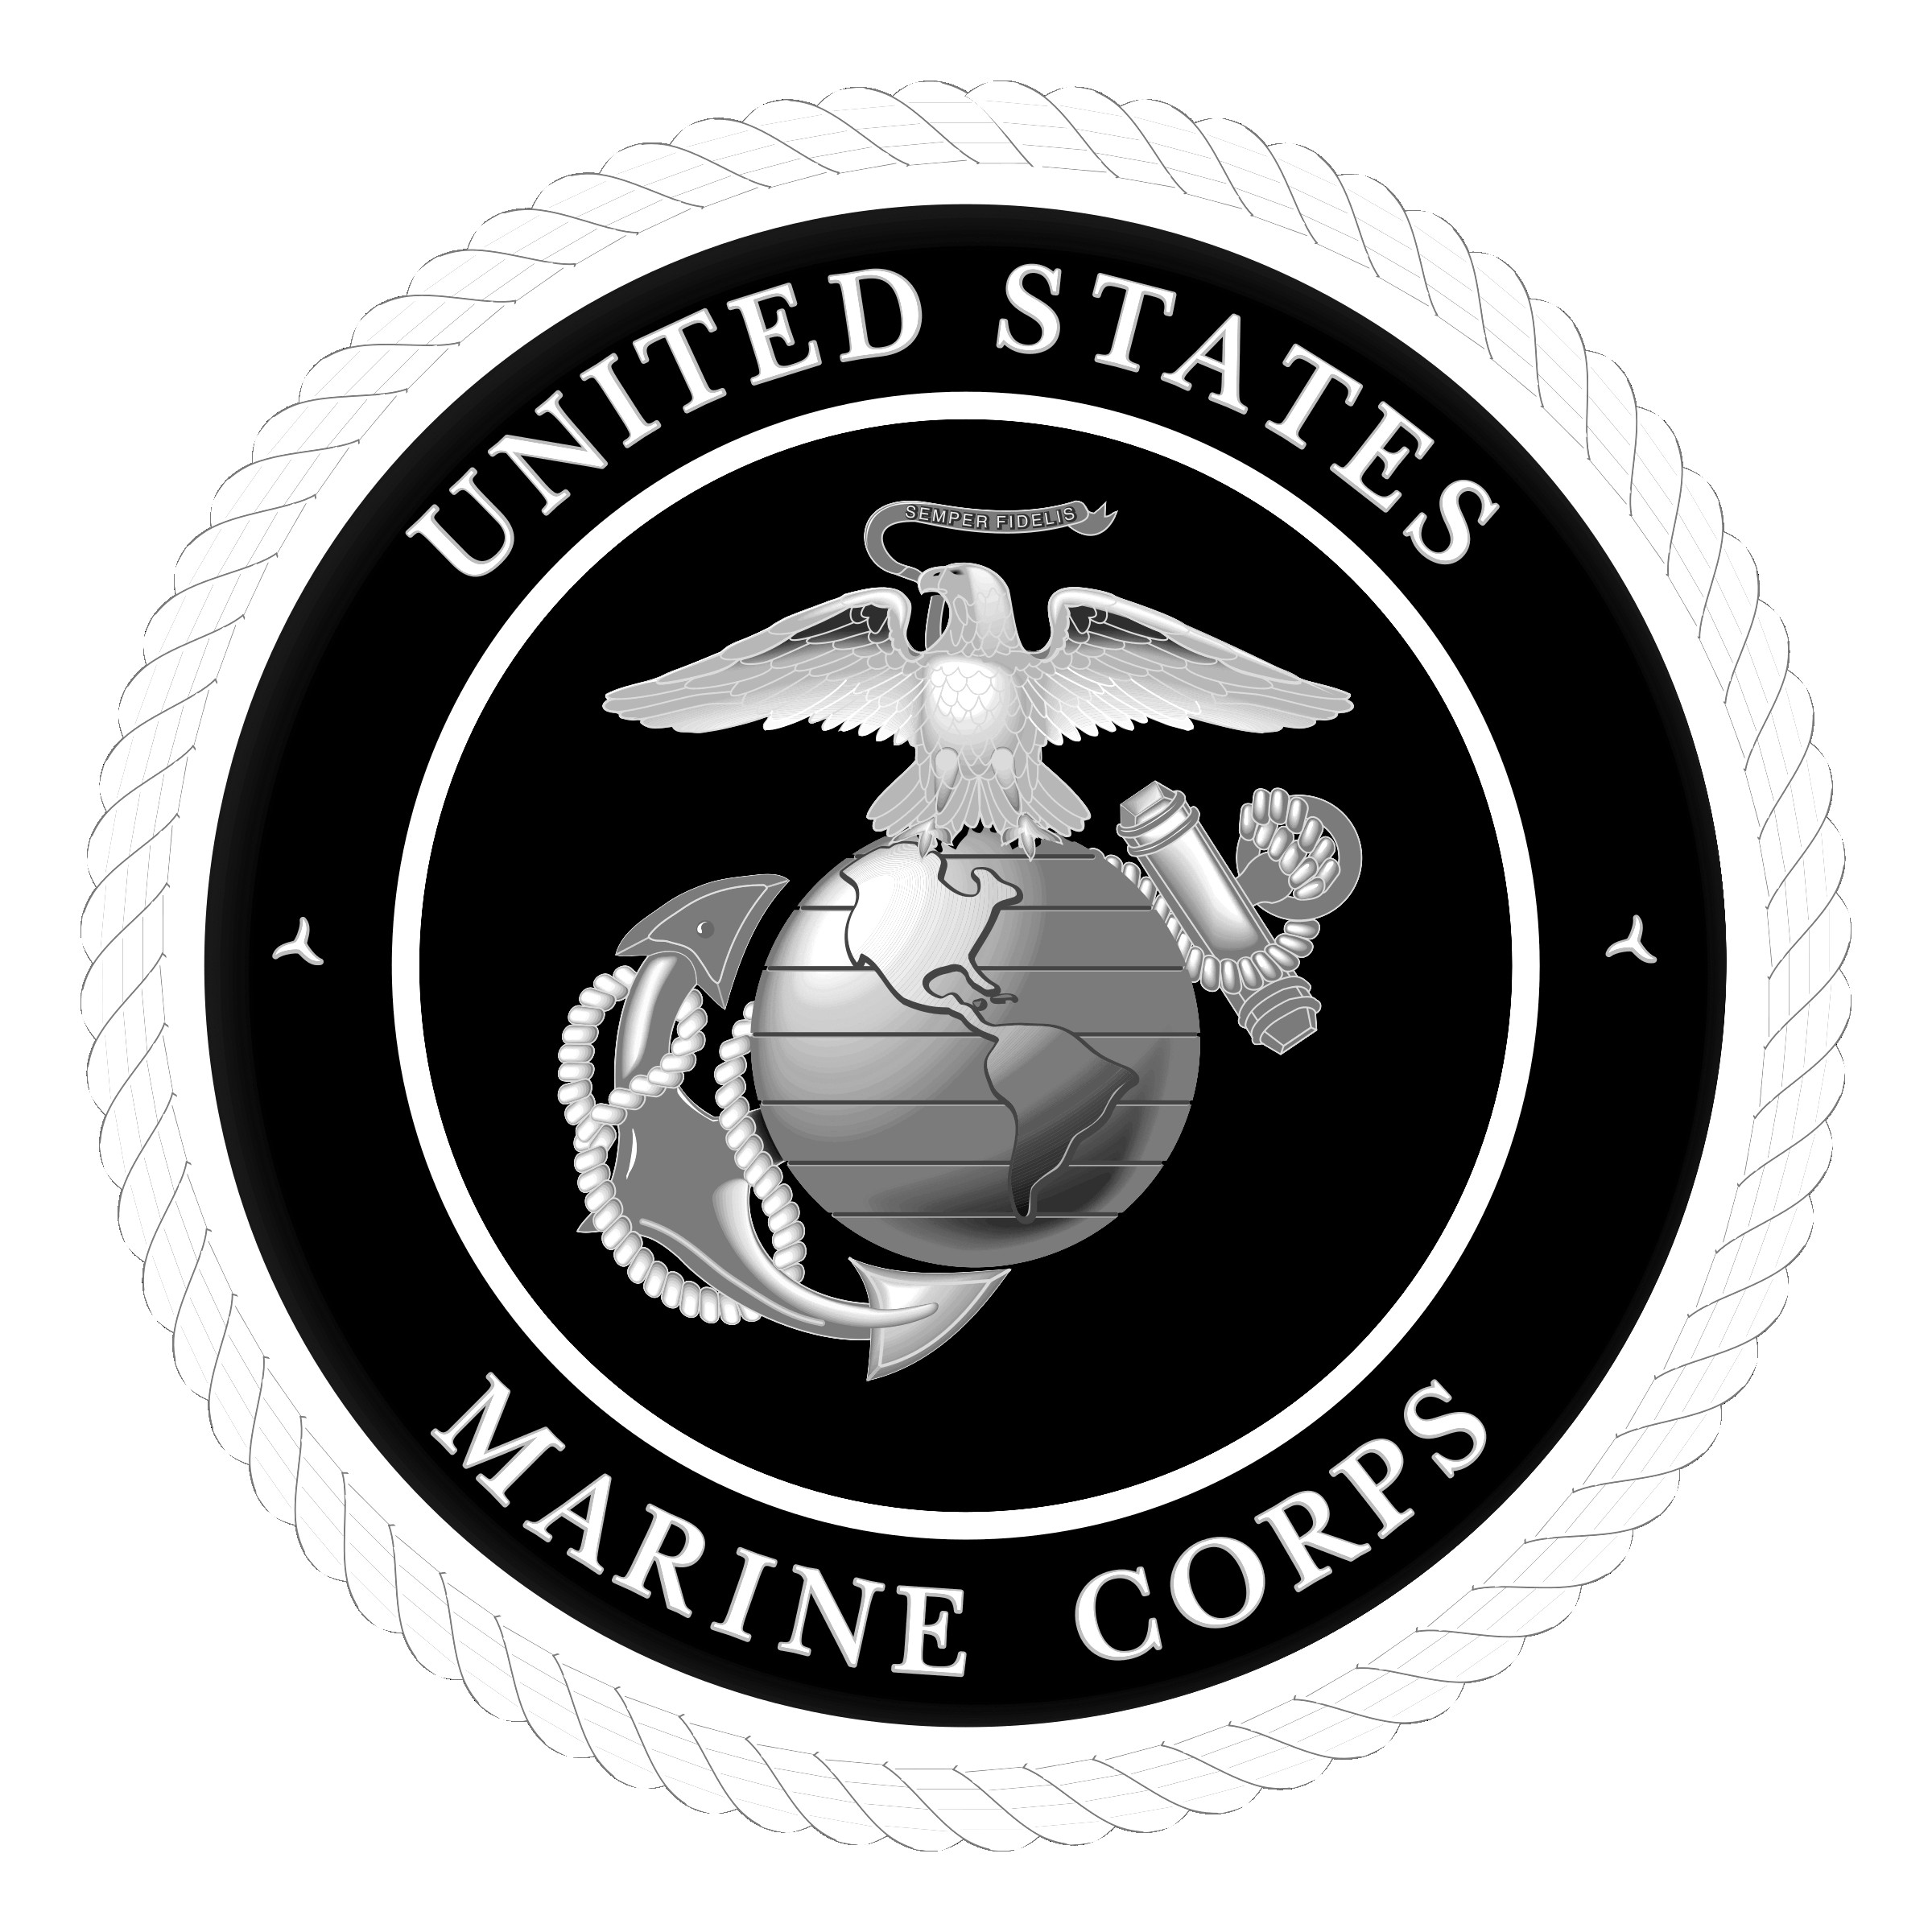 The best free Usmc vector images. Download from 72 free vectors of Usmc ...